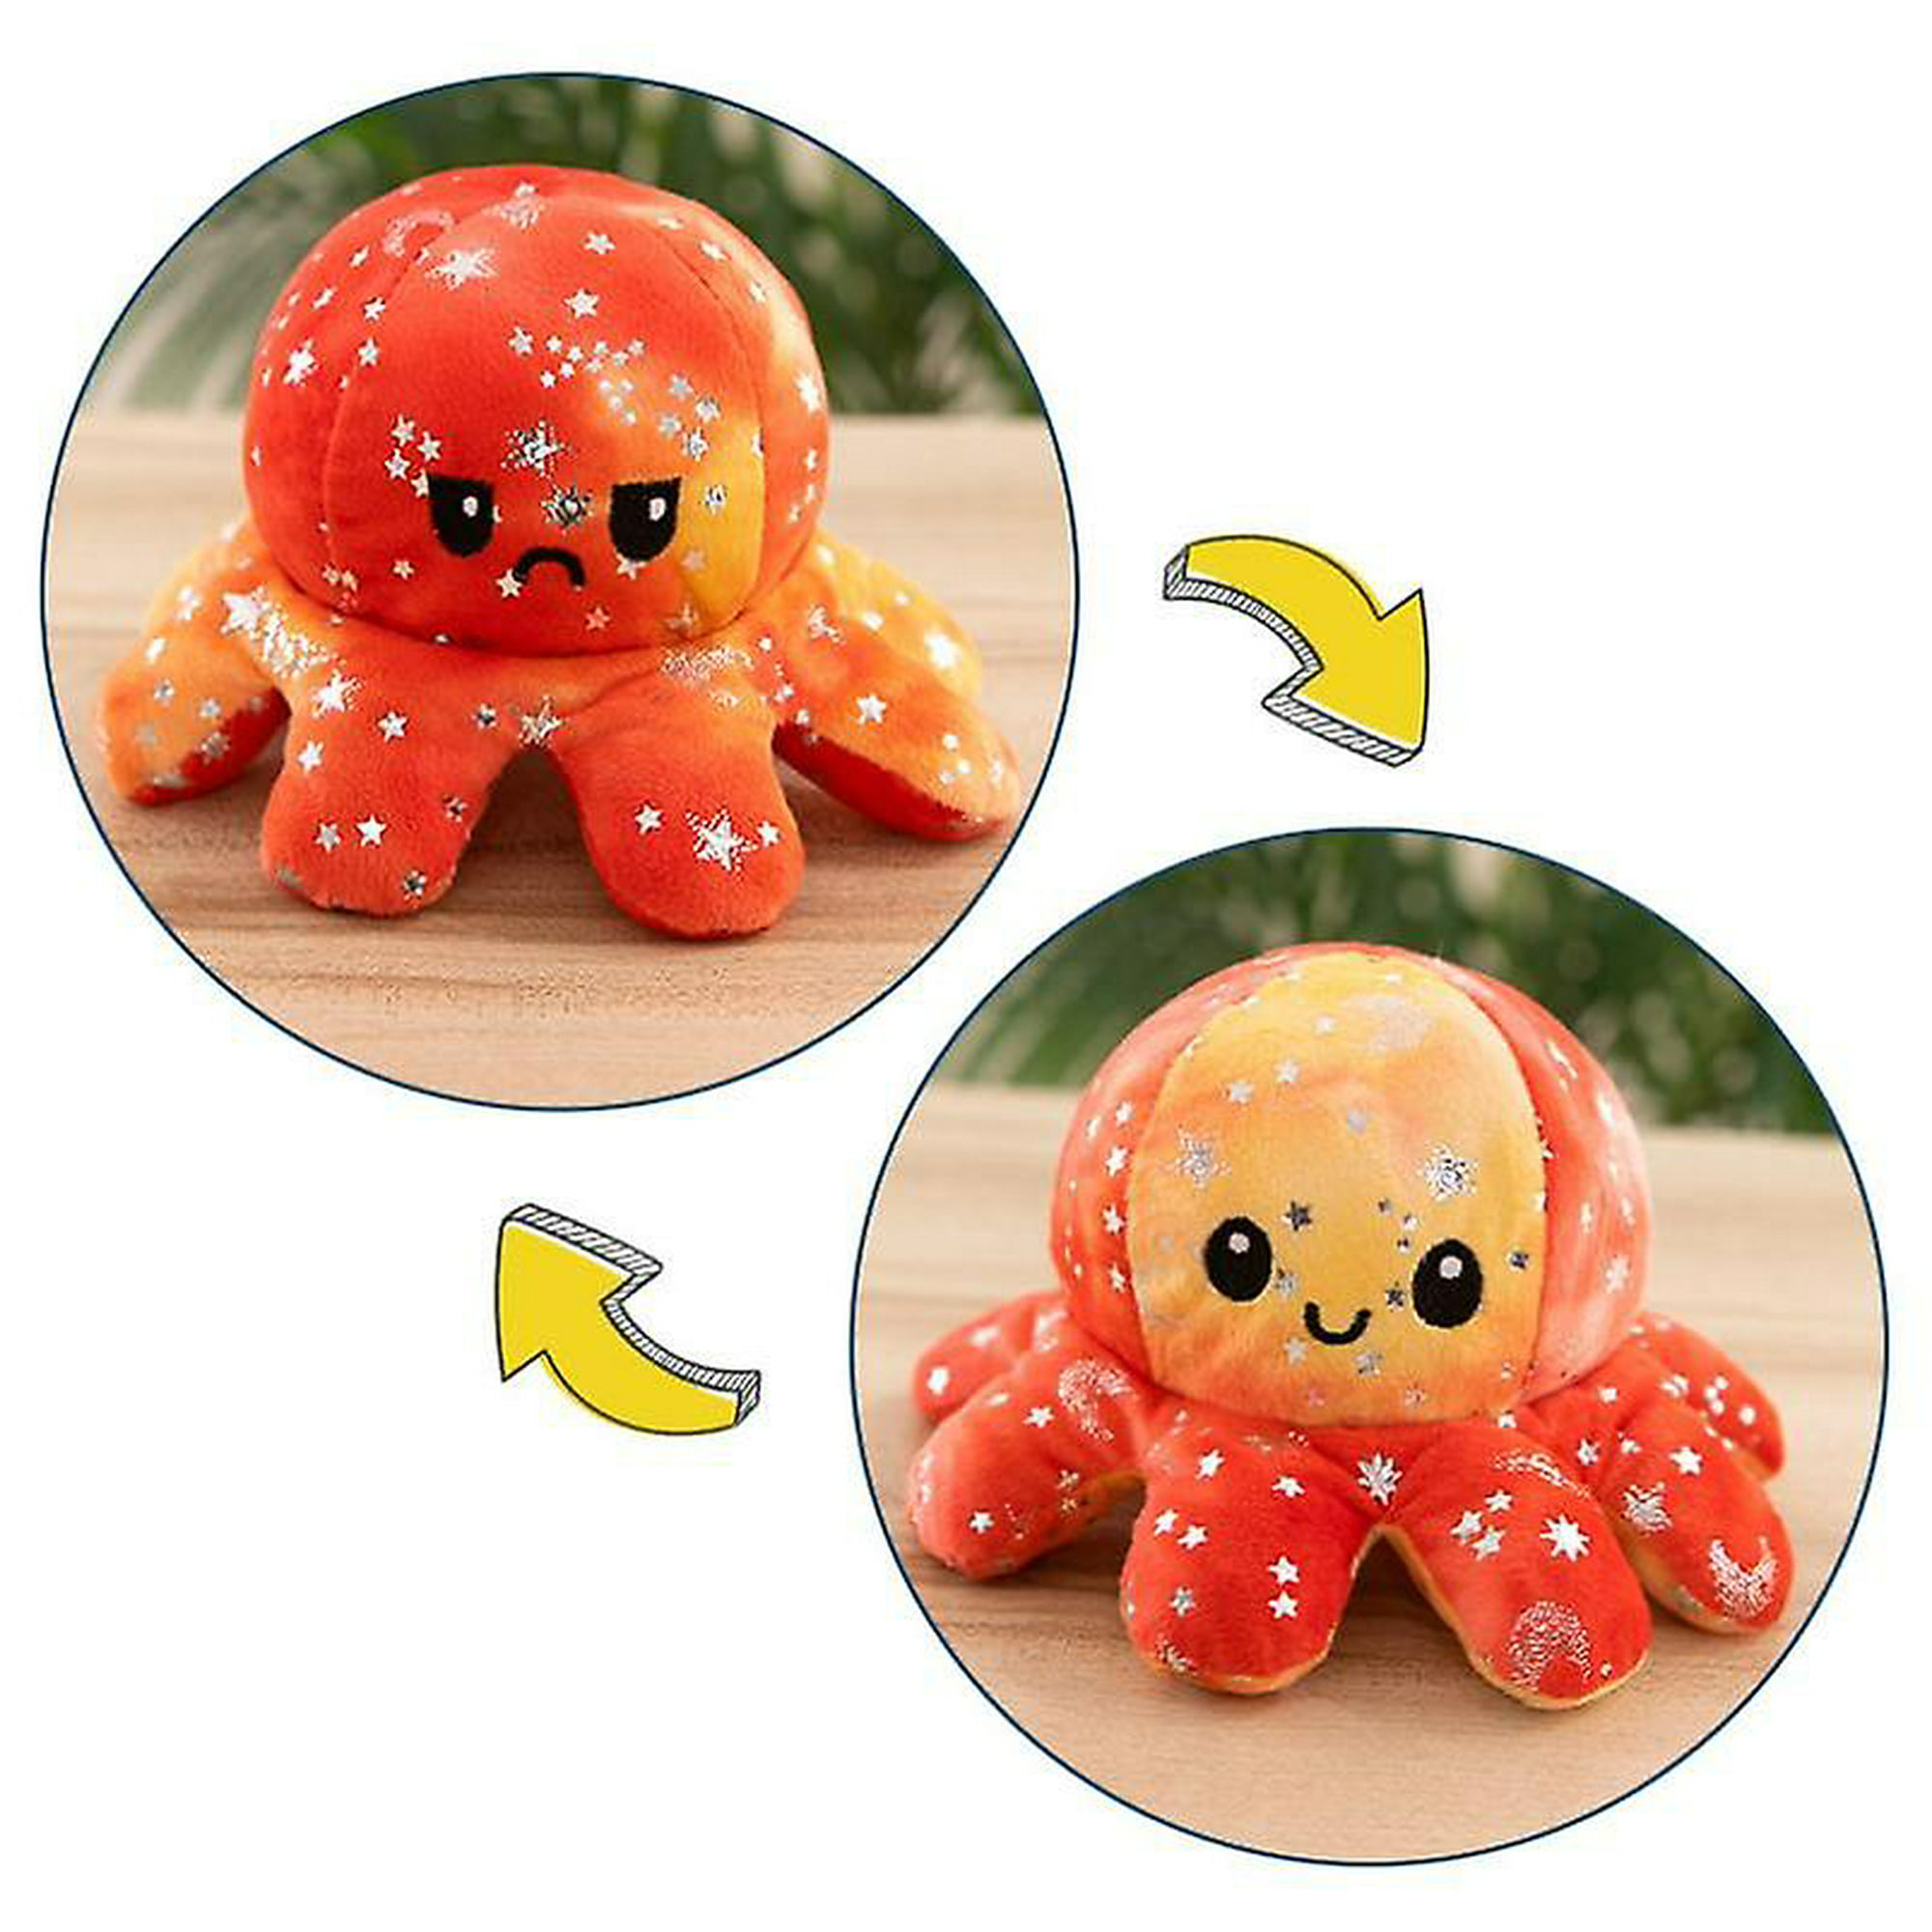 Reversible Octopus, Plush Toys Cute Animal Doll Octopus Doll Flip Double  Sided Soft Creative Toys Gifts For Kids Family Friends (red)Reversible  Octopus, Plush Toys Cute Animal Doll Octopus Doll Flip | Walmart